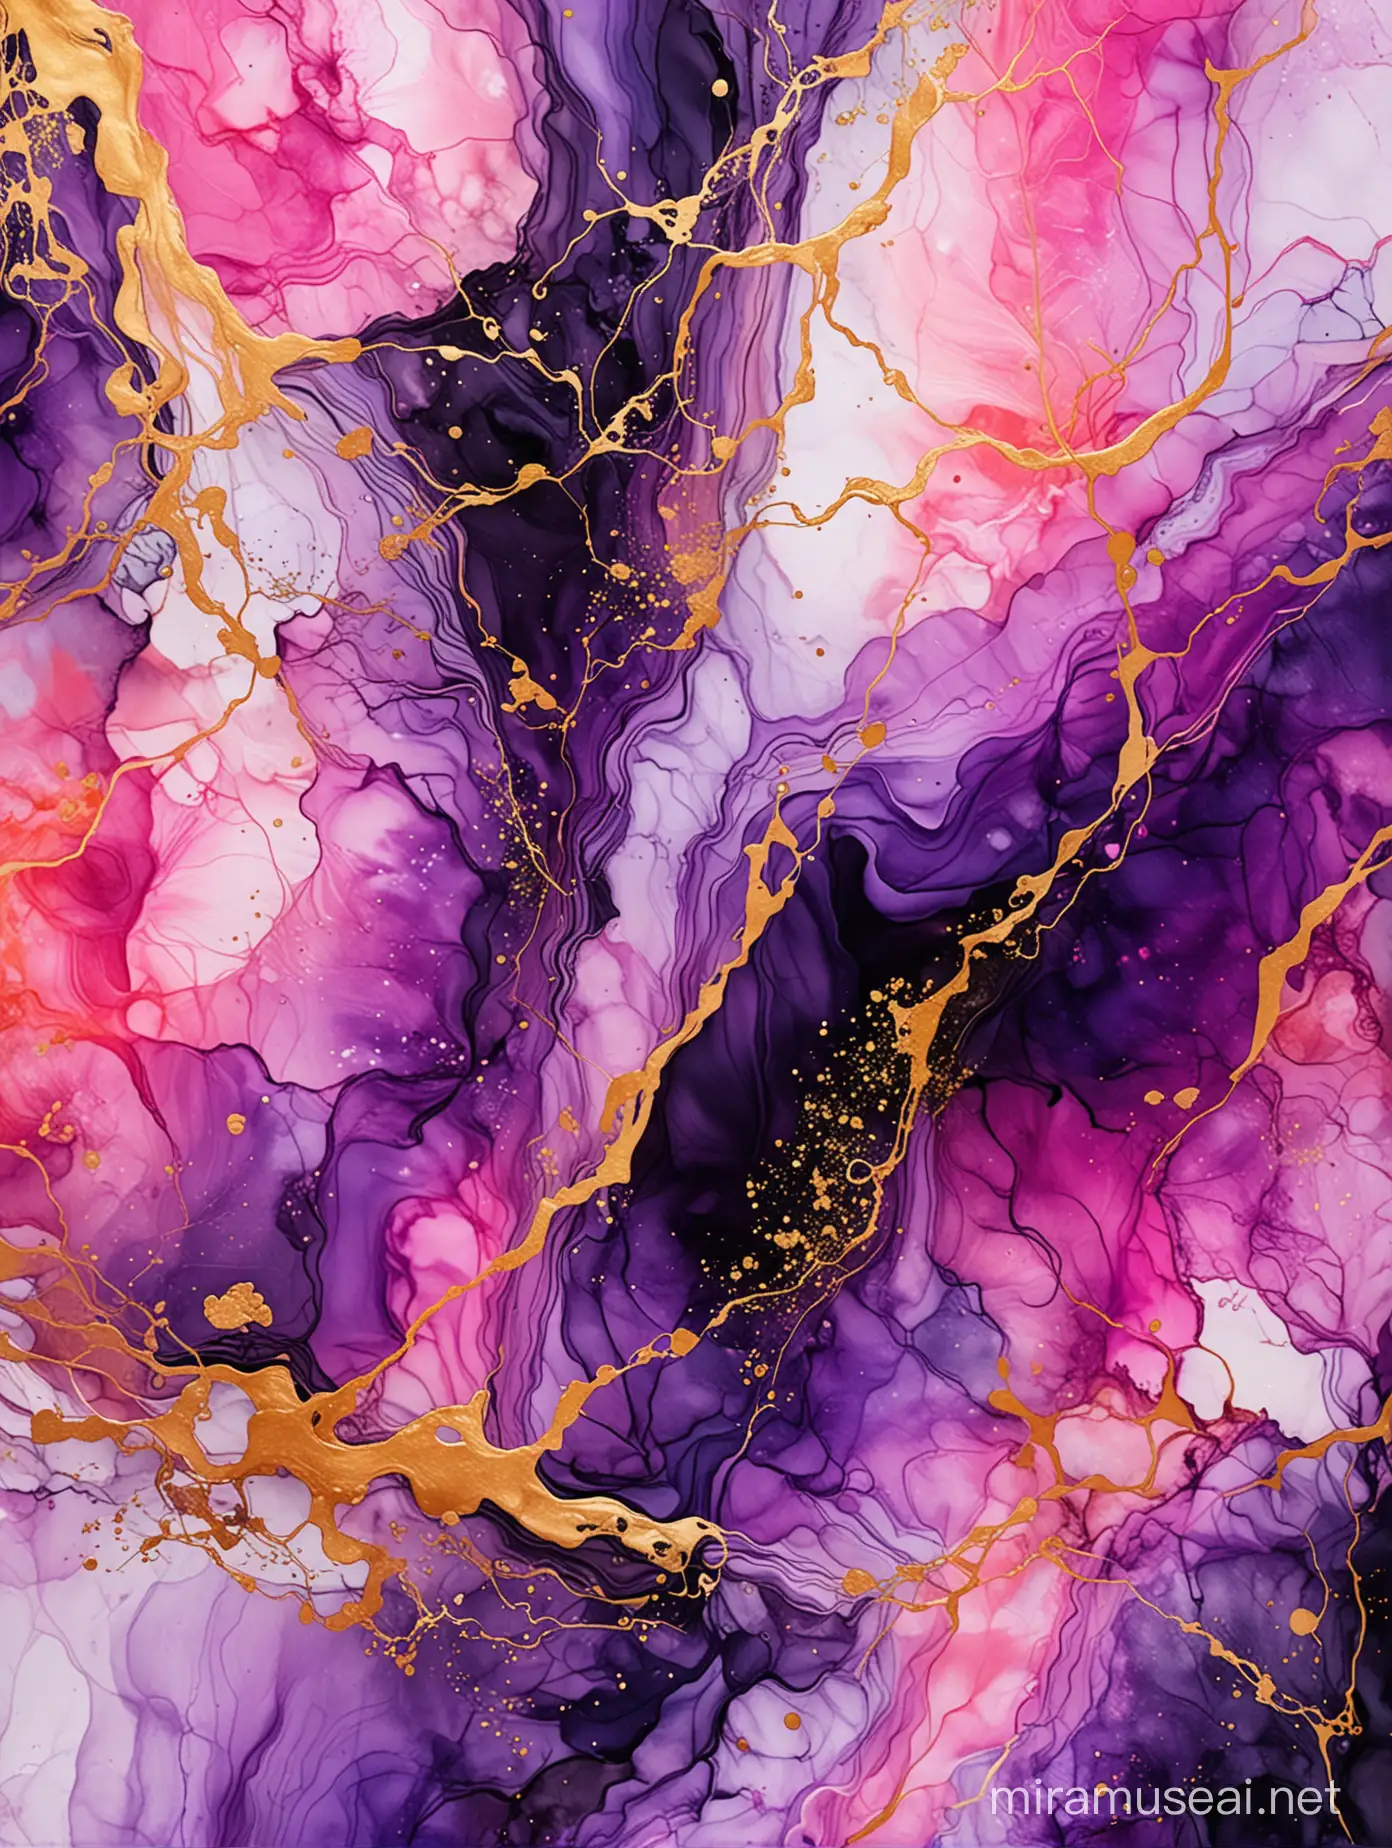 Colorful marble, illustration of alcohol ink, pink, purple, orange, purple and black colors with gold veins.